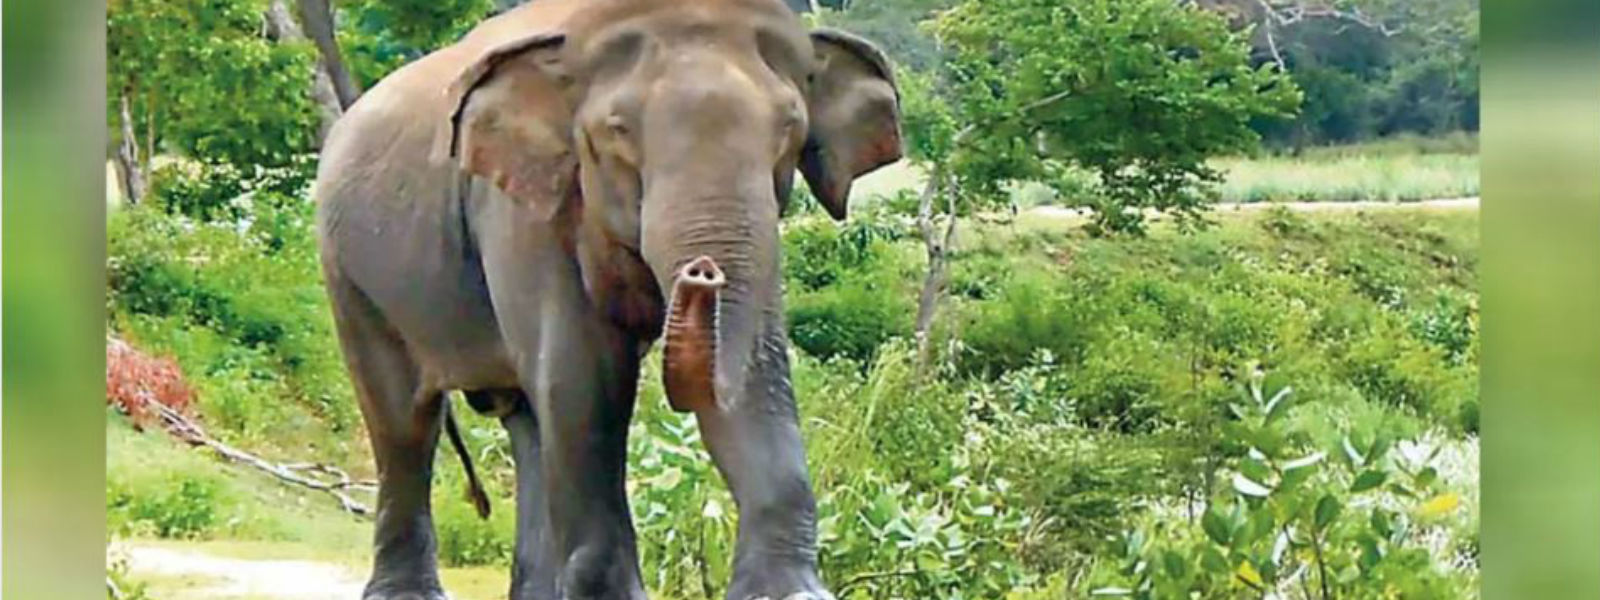 Foreign assistance to resolve elephant menace